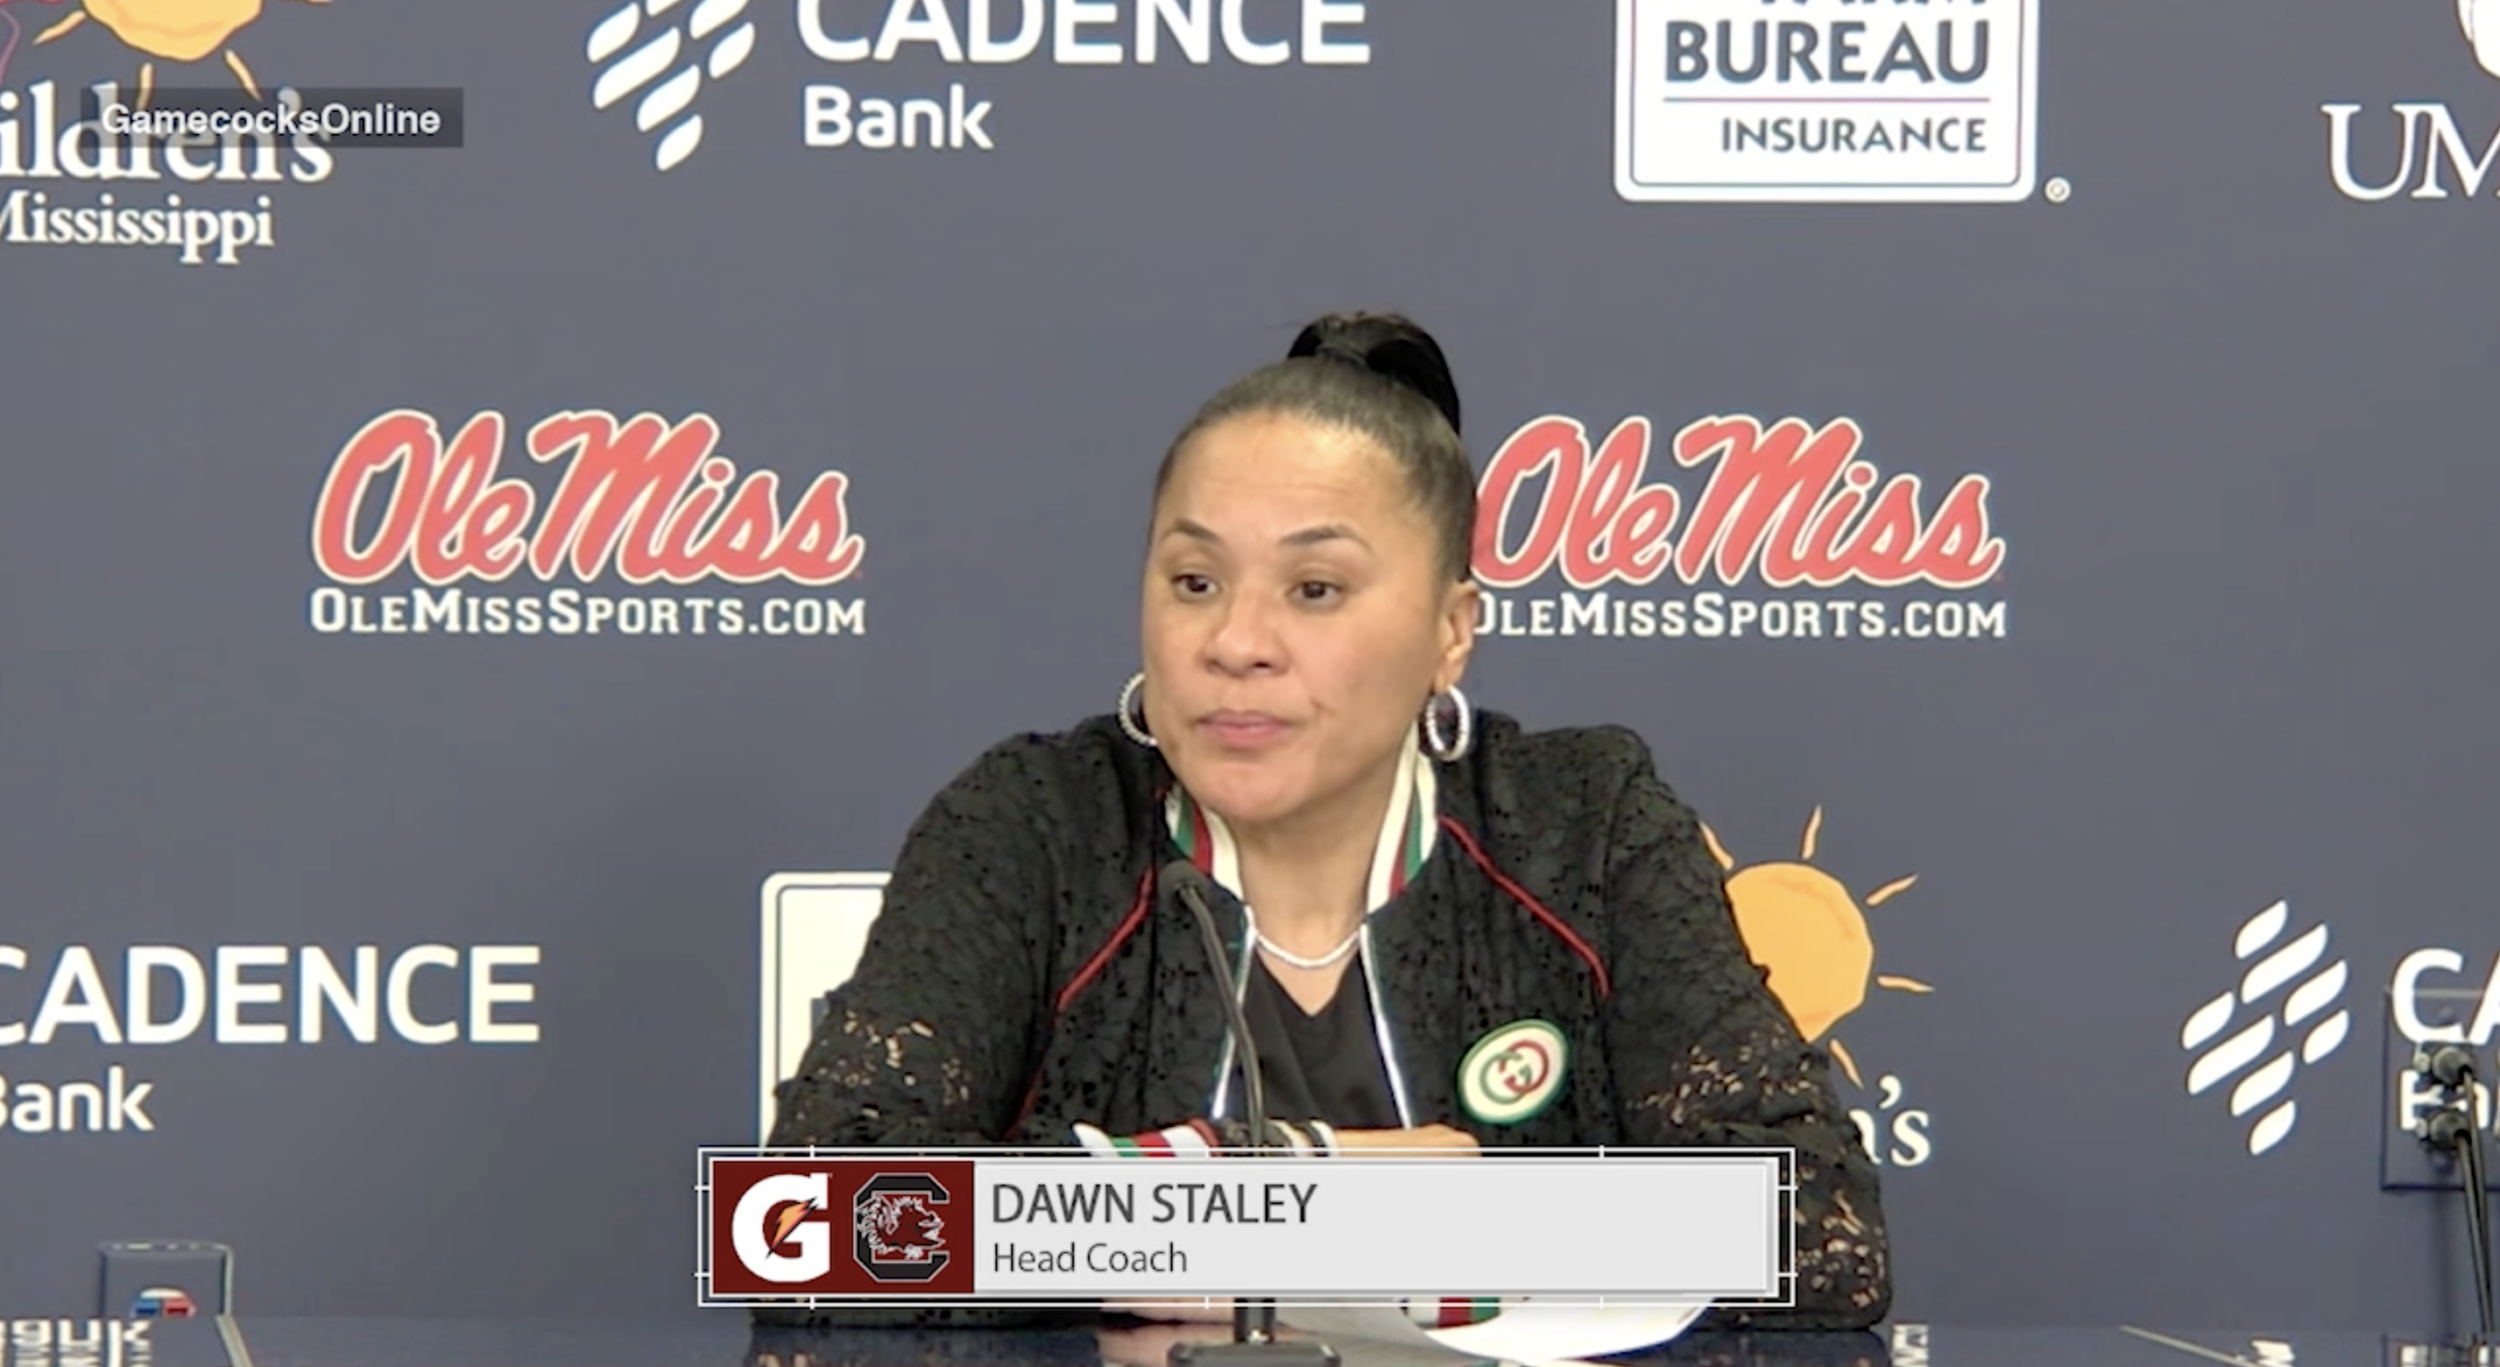 PostGame News Conference: (Ole Miss) - Dawn Staley